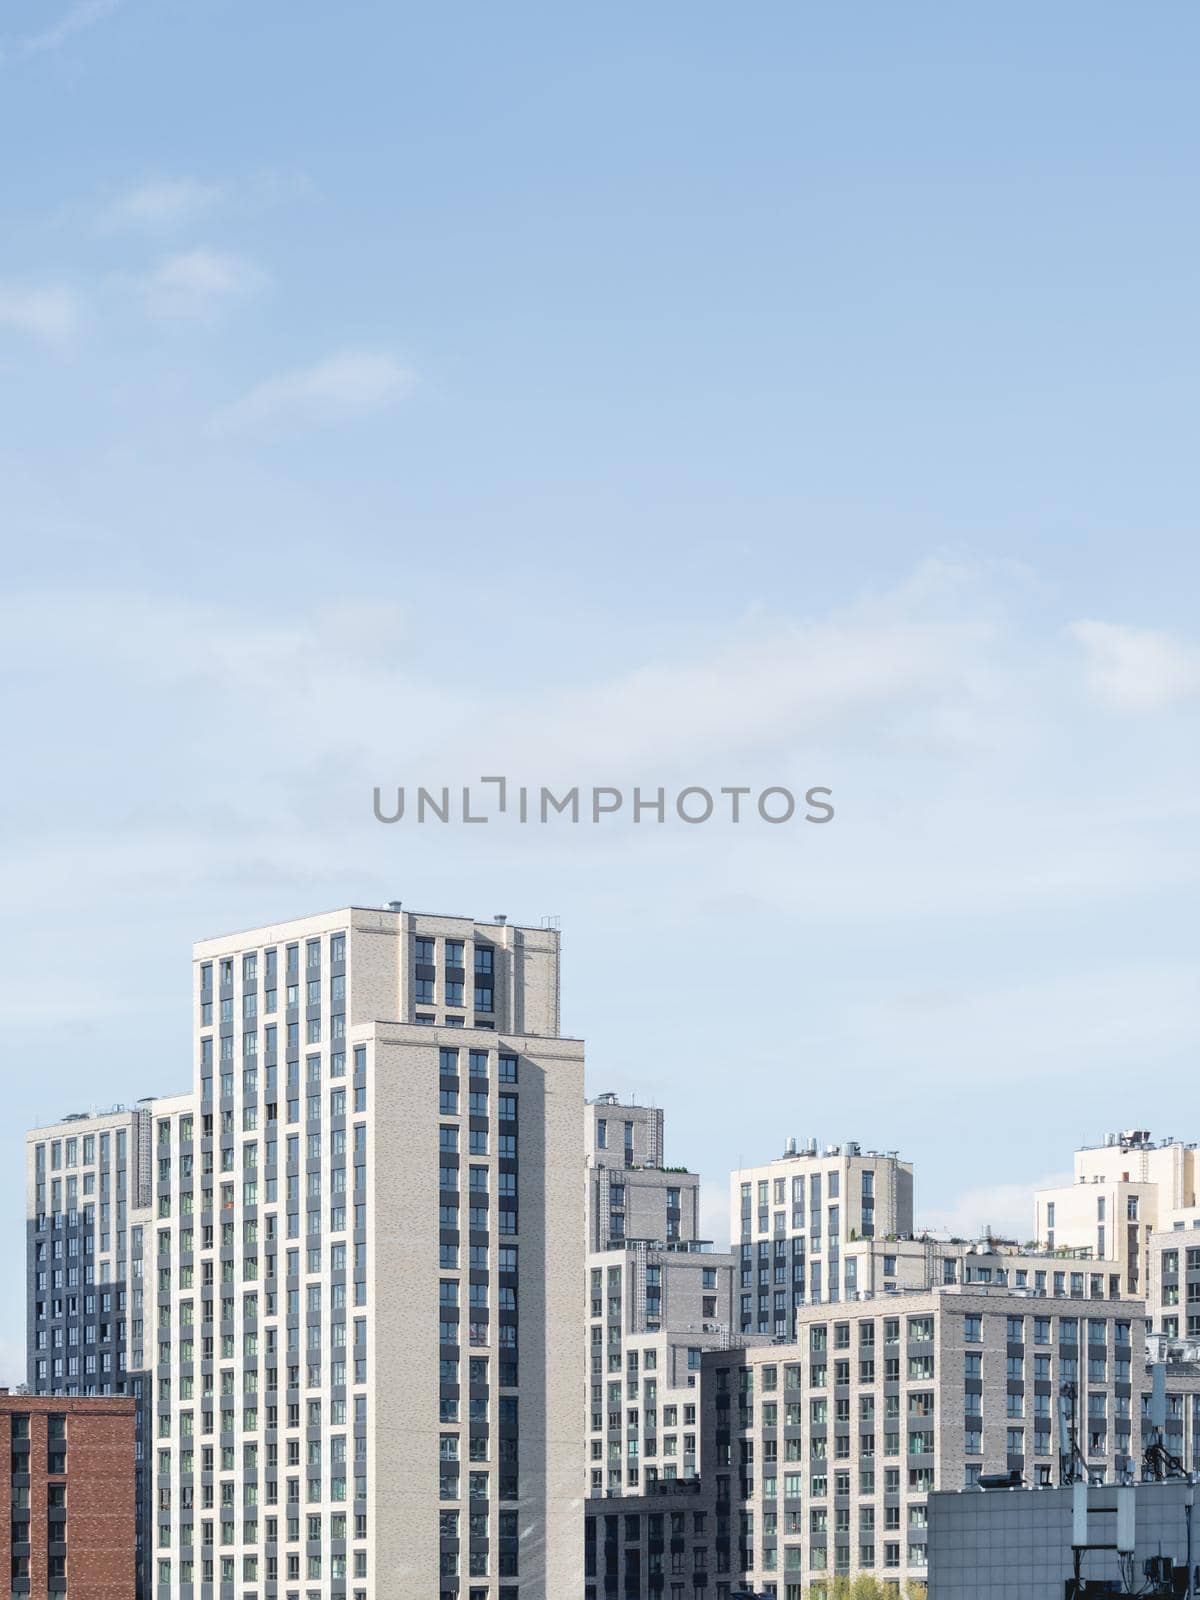 New residential district of Moscow. Modern architecture of apartment buildings. Vertical banner with clear blue sky. Russia.